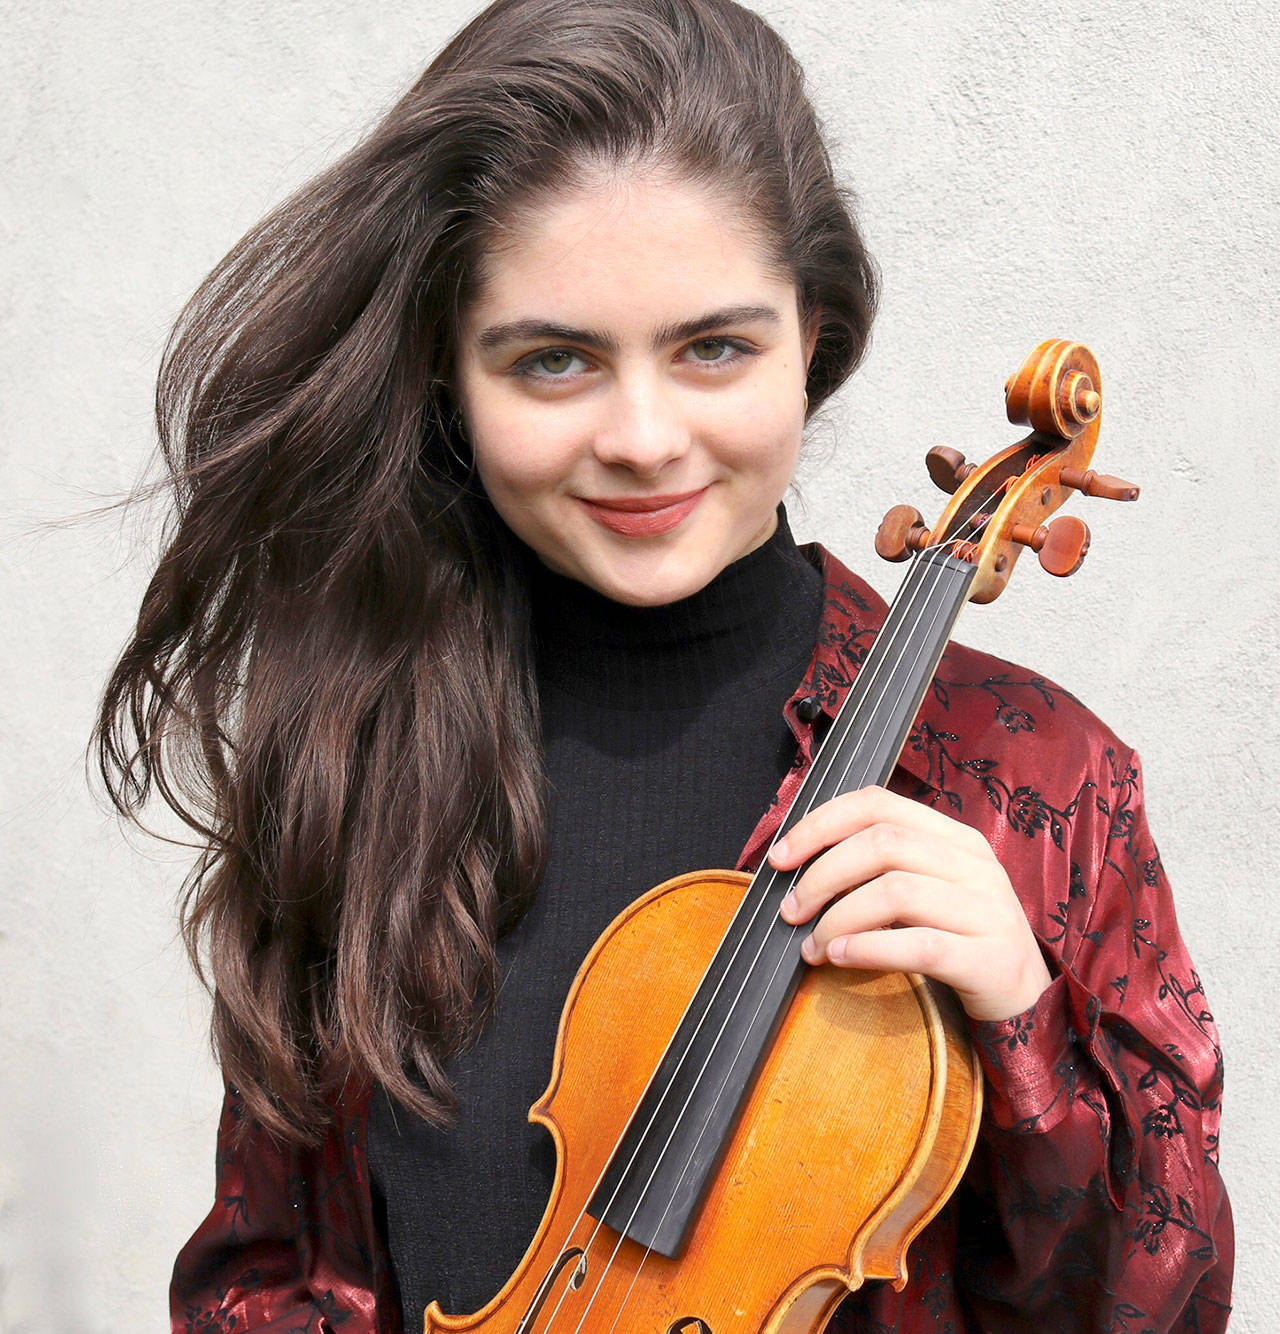 Violinist Marley Erickson of Port Townsend will be the guest artist of two Port Angeles Chamber Orchestra concerts this weekend.